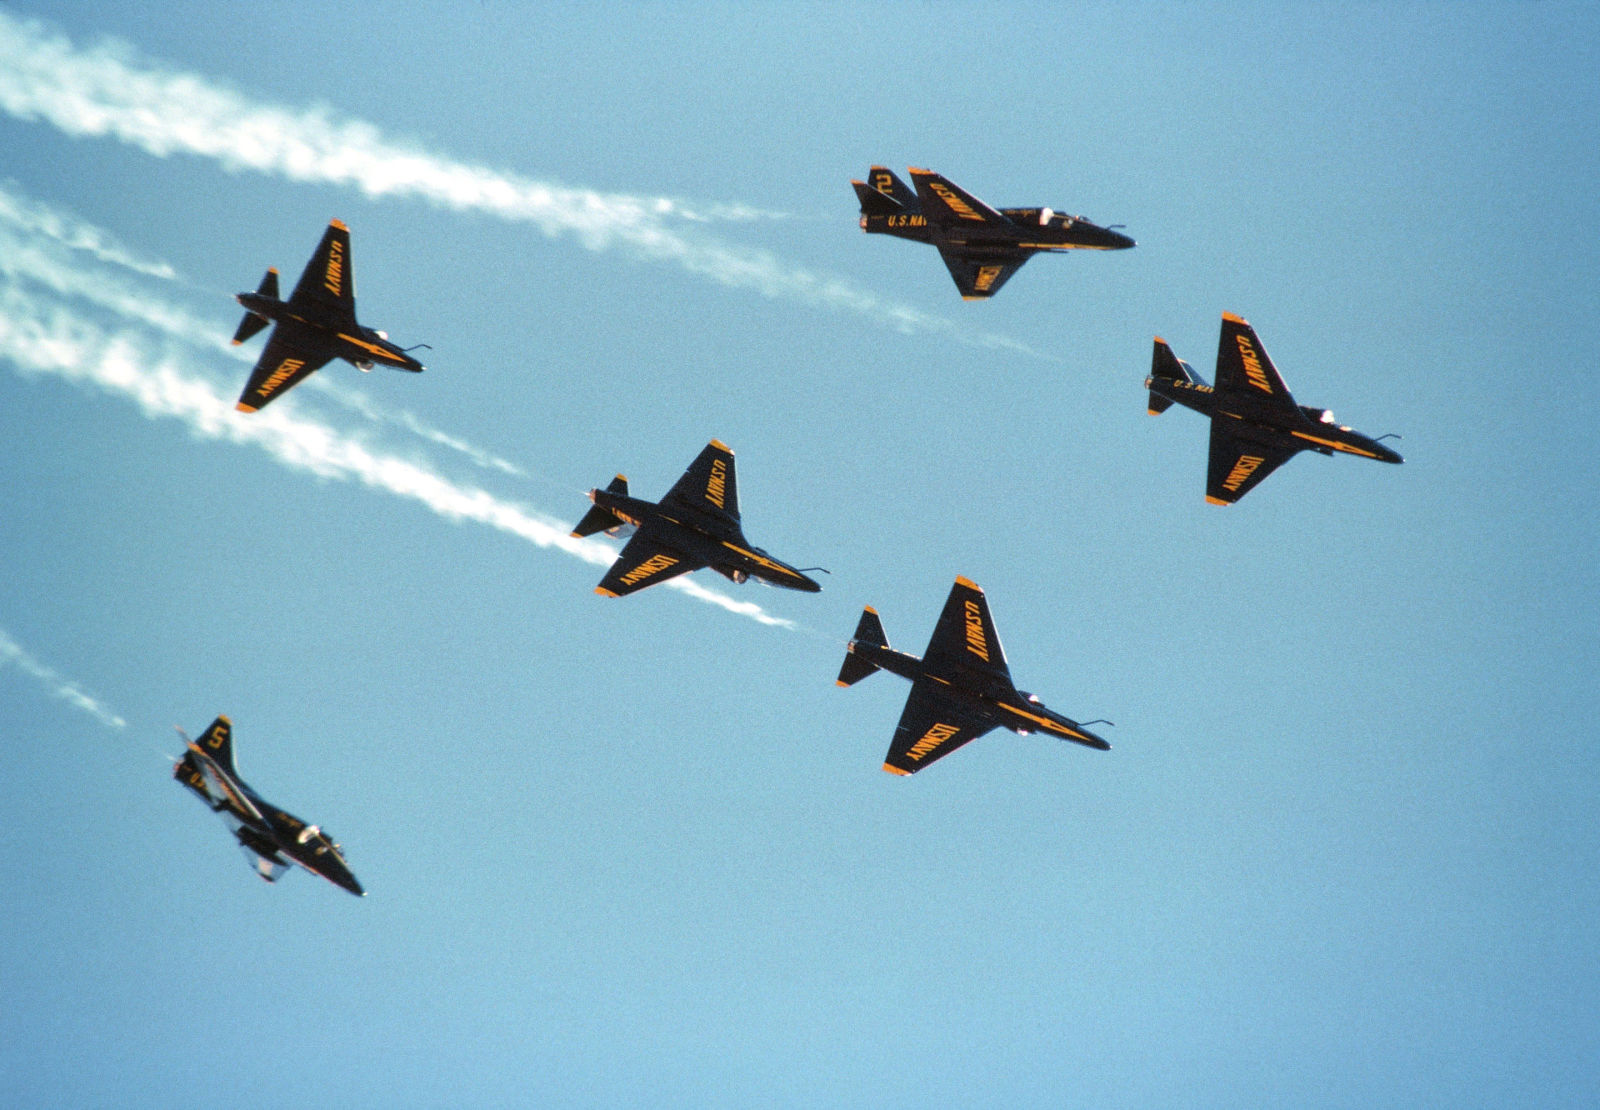 A-4F Skyhawks were part of the act from 1974-1986